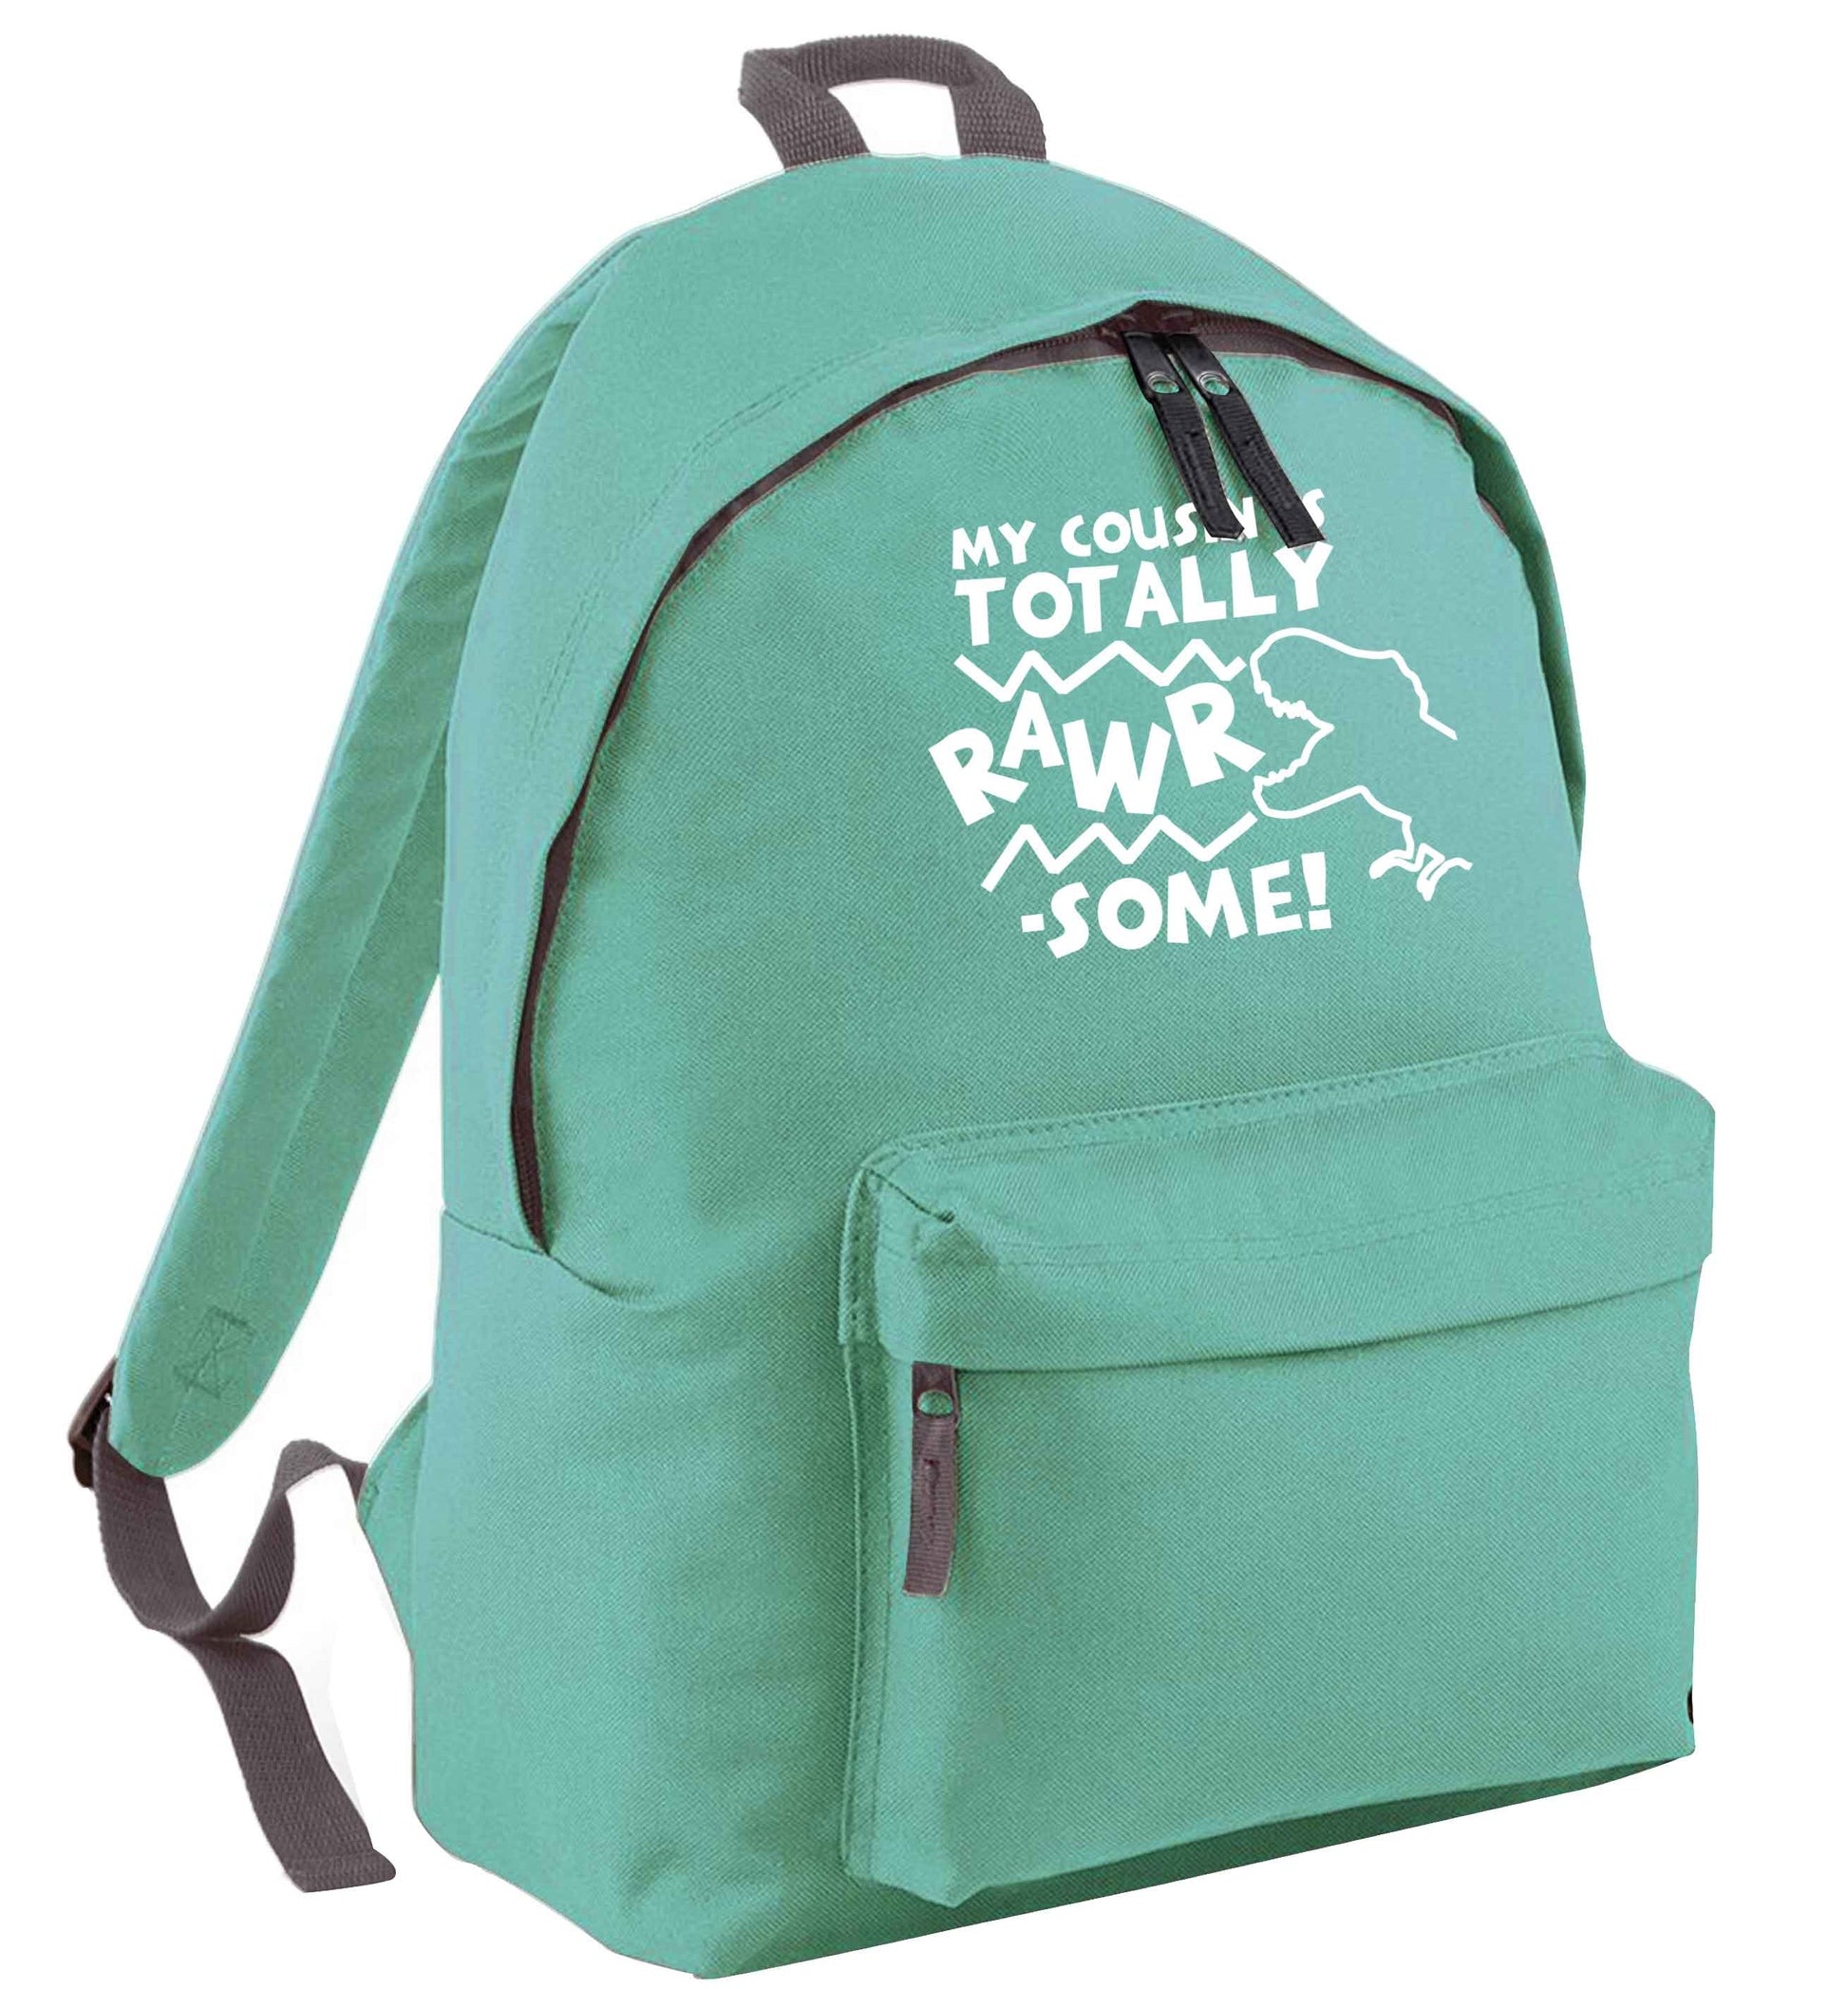 My cousin is totally rawrsome mint adults backpack